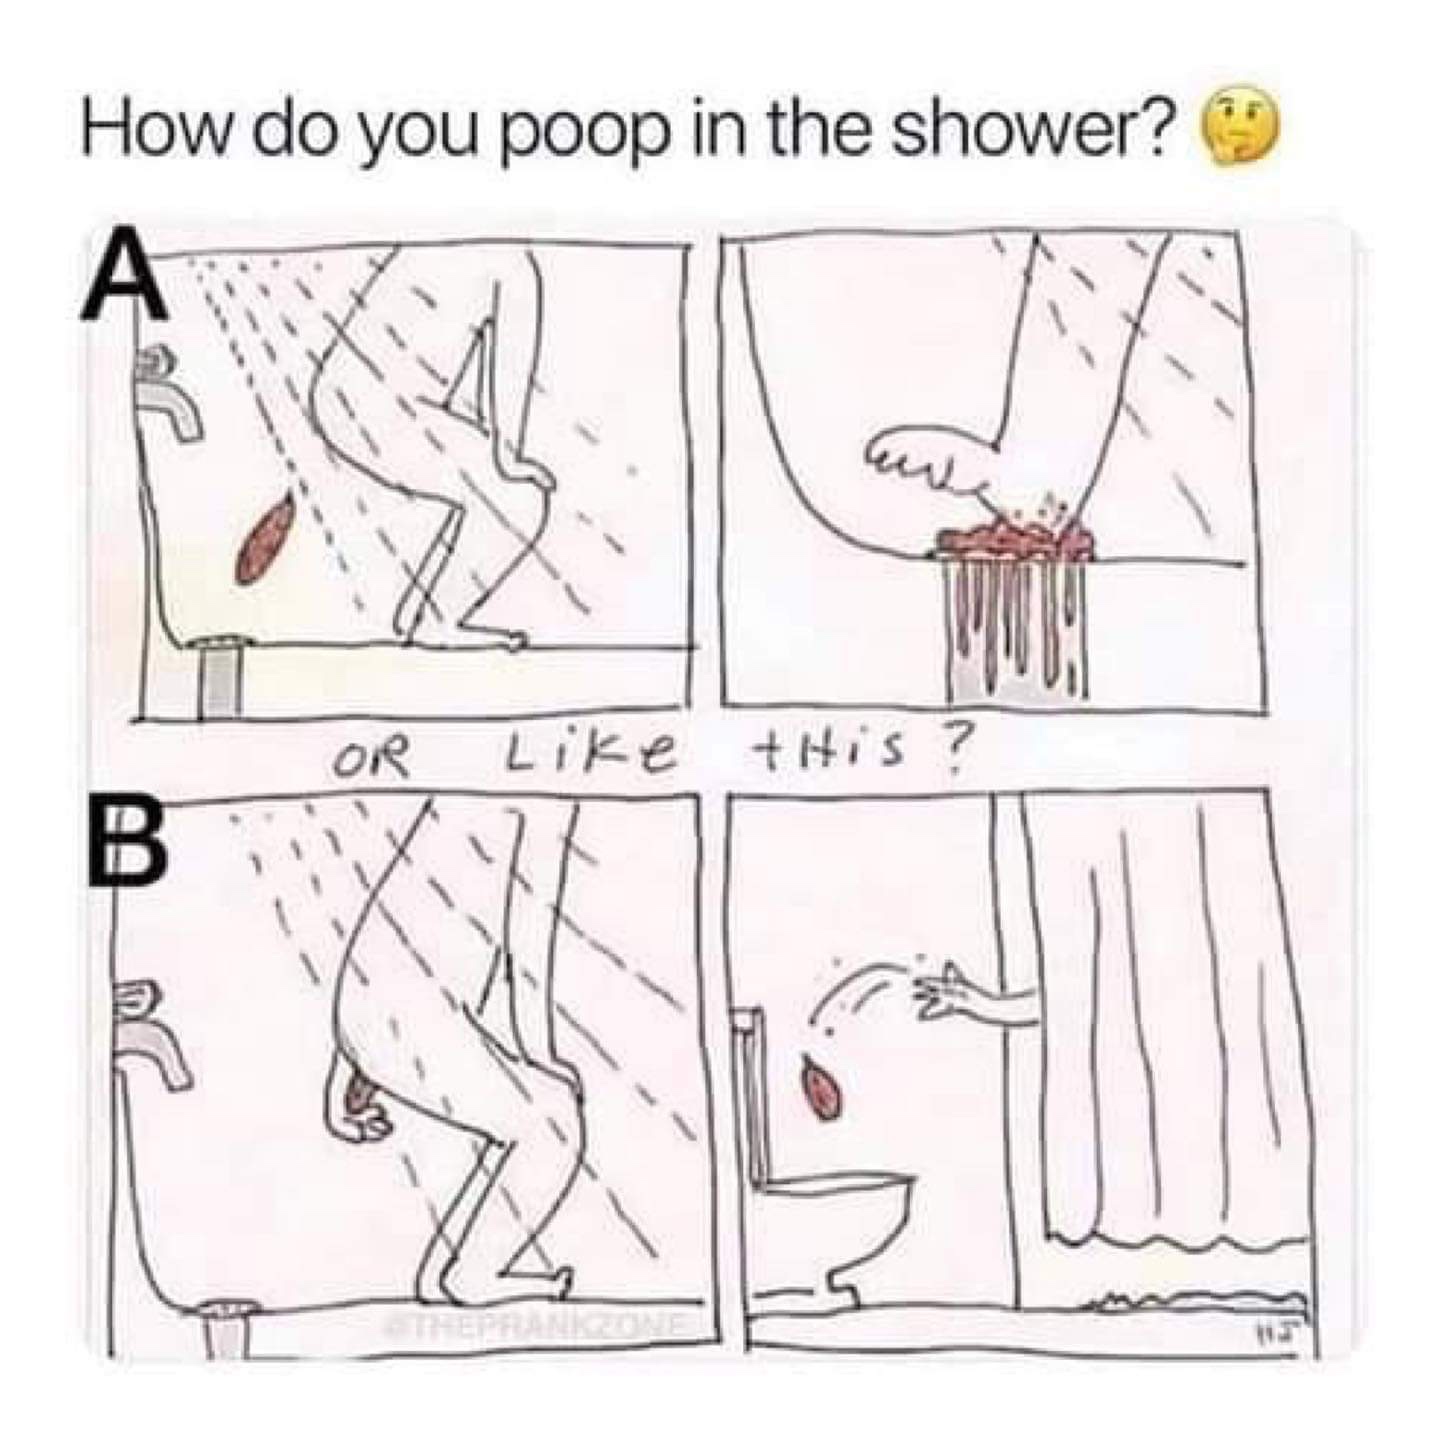 shit in the shower - How do you poop in the shower? ole this?